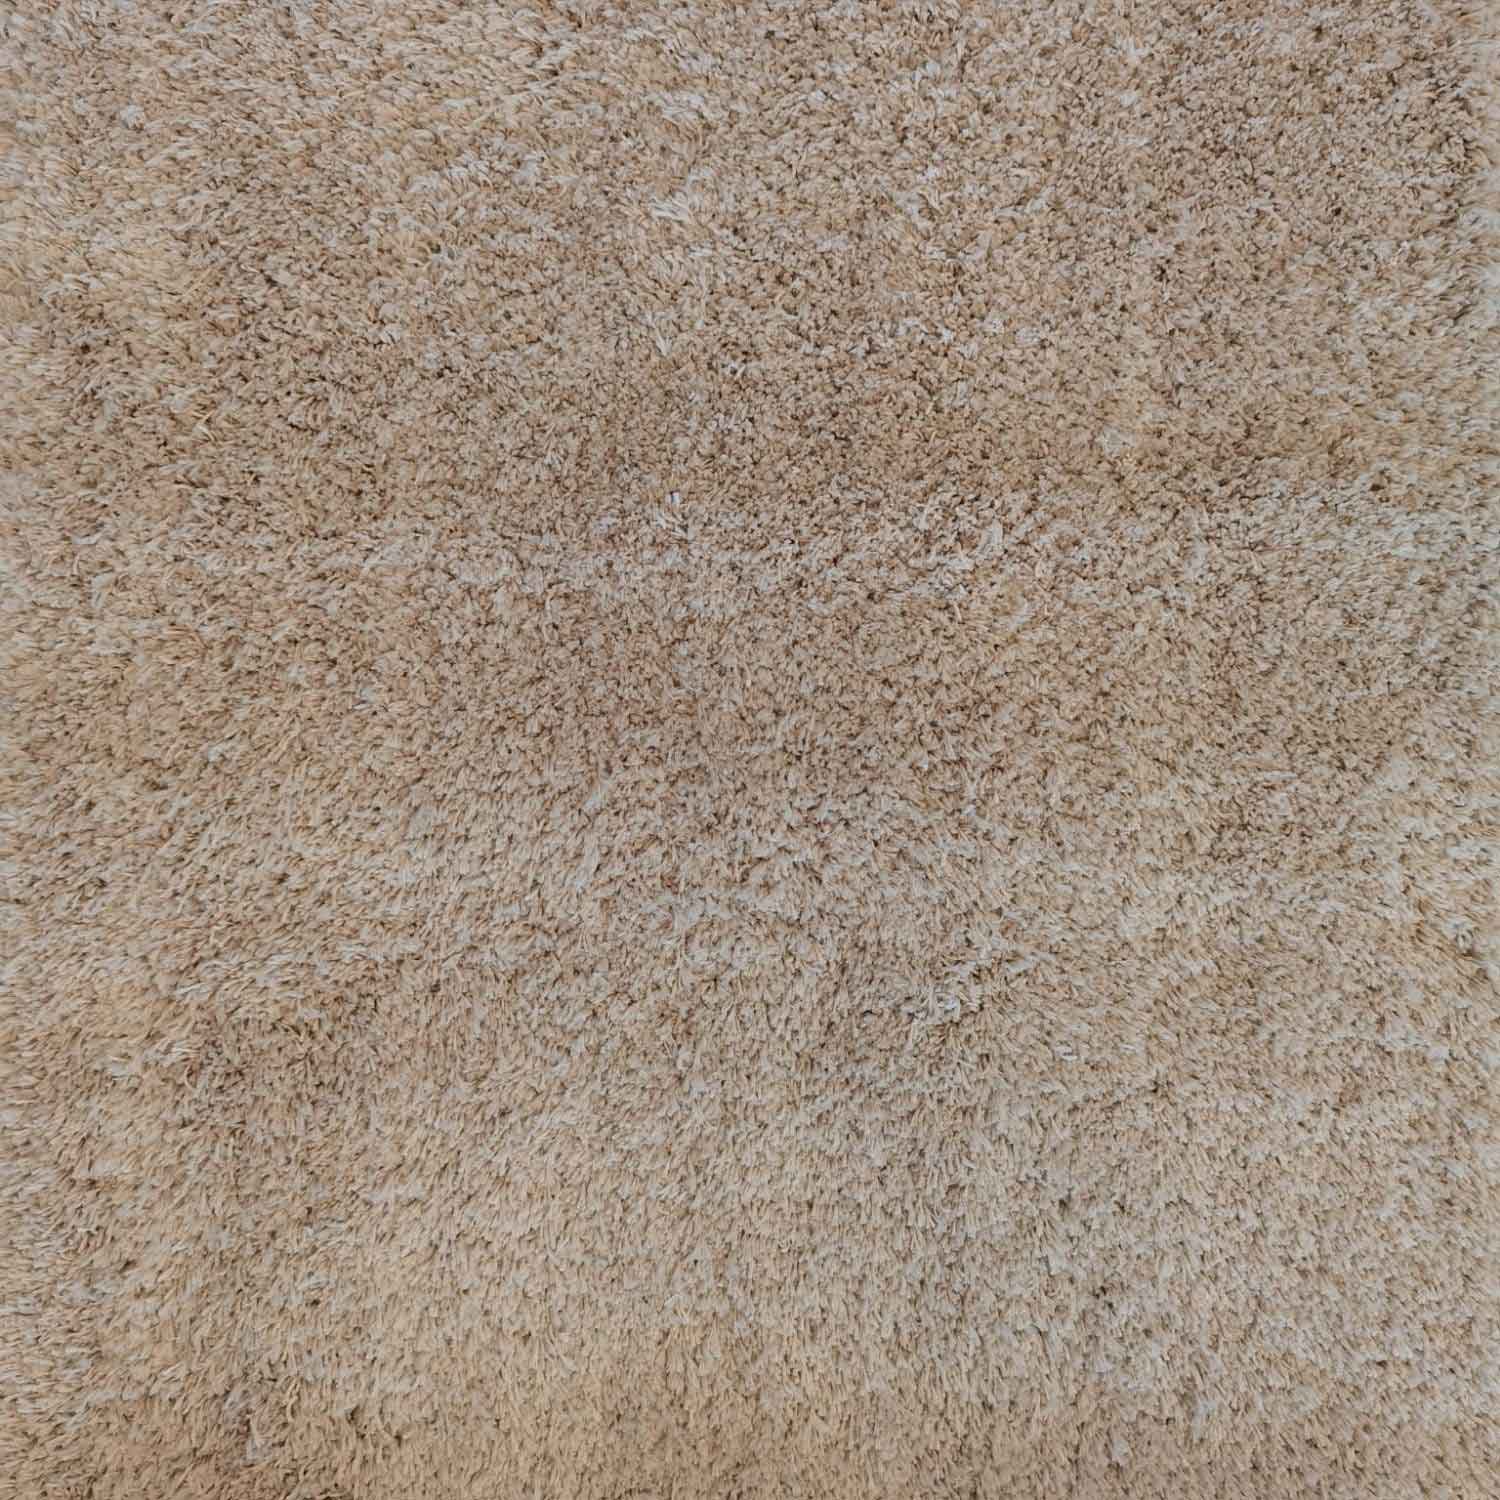 The Home Bathroom Soft Polyester Bath Mat - Beige 1 Shaws Department Stores